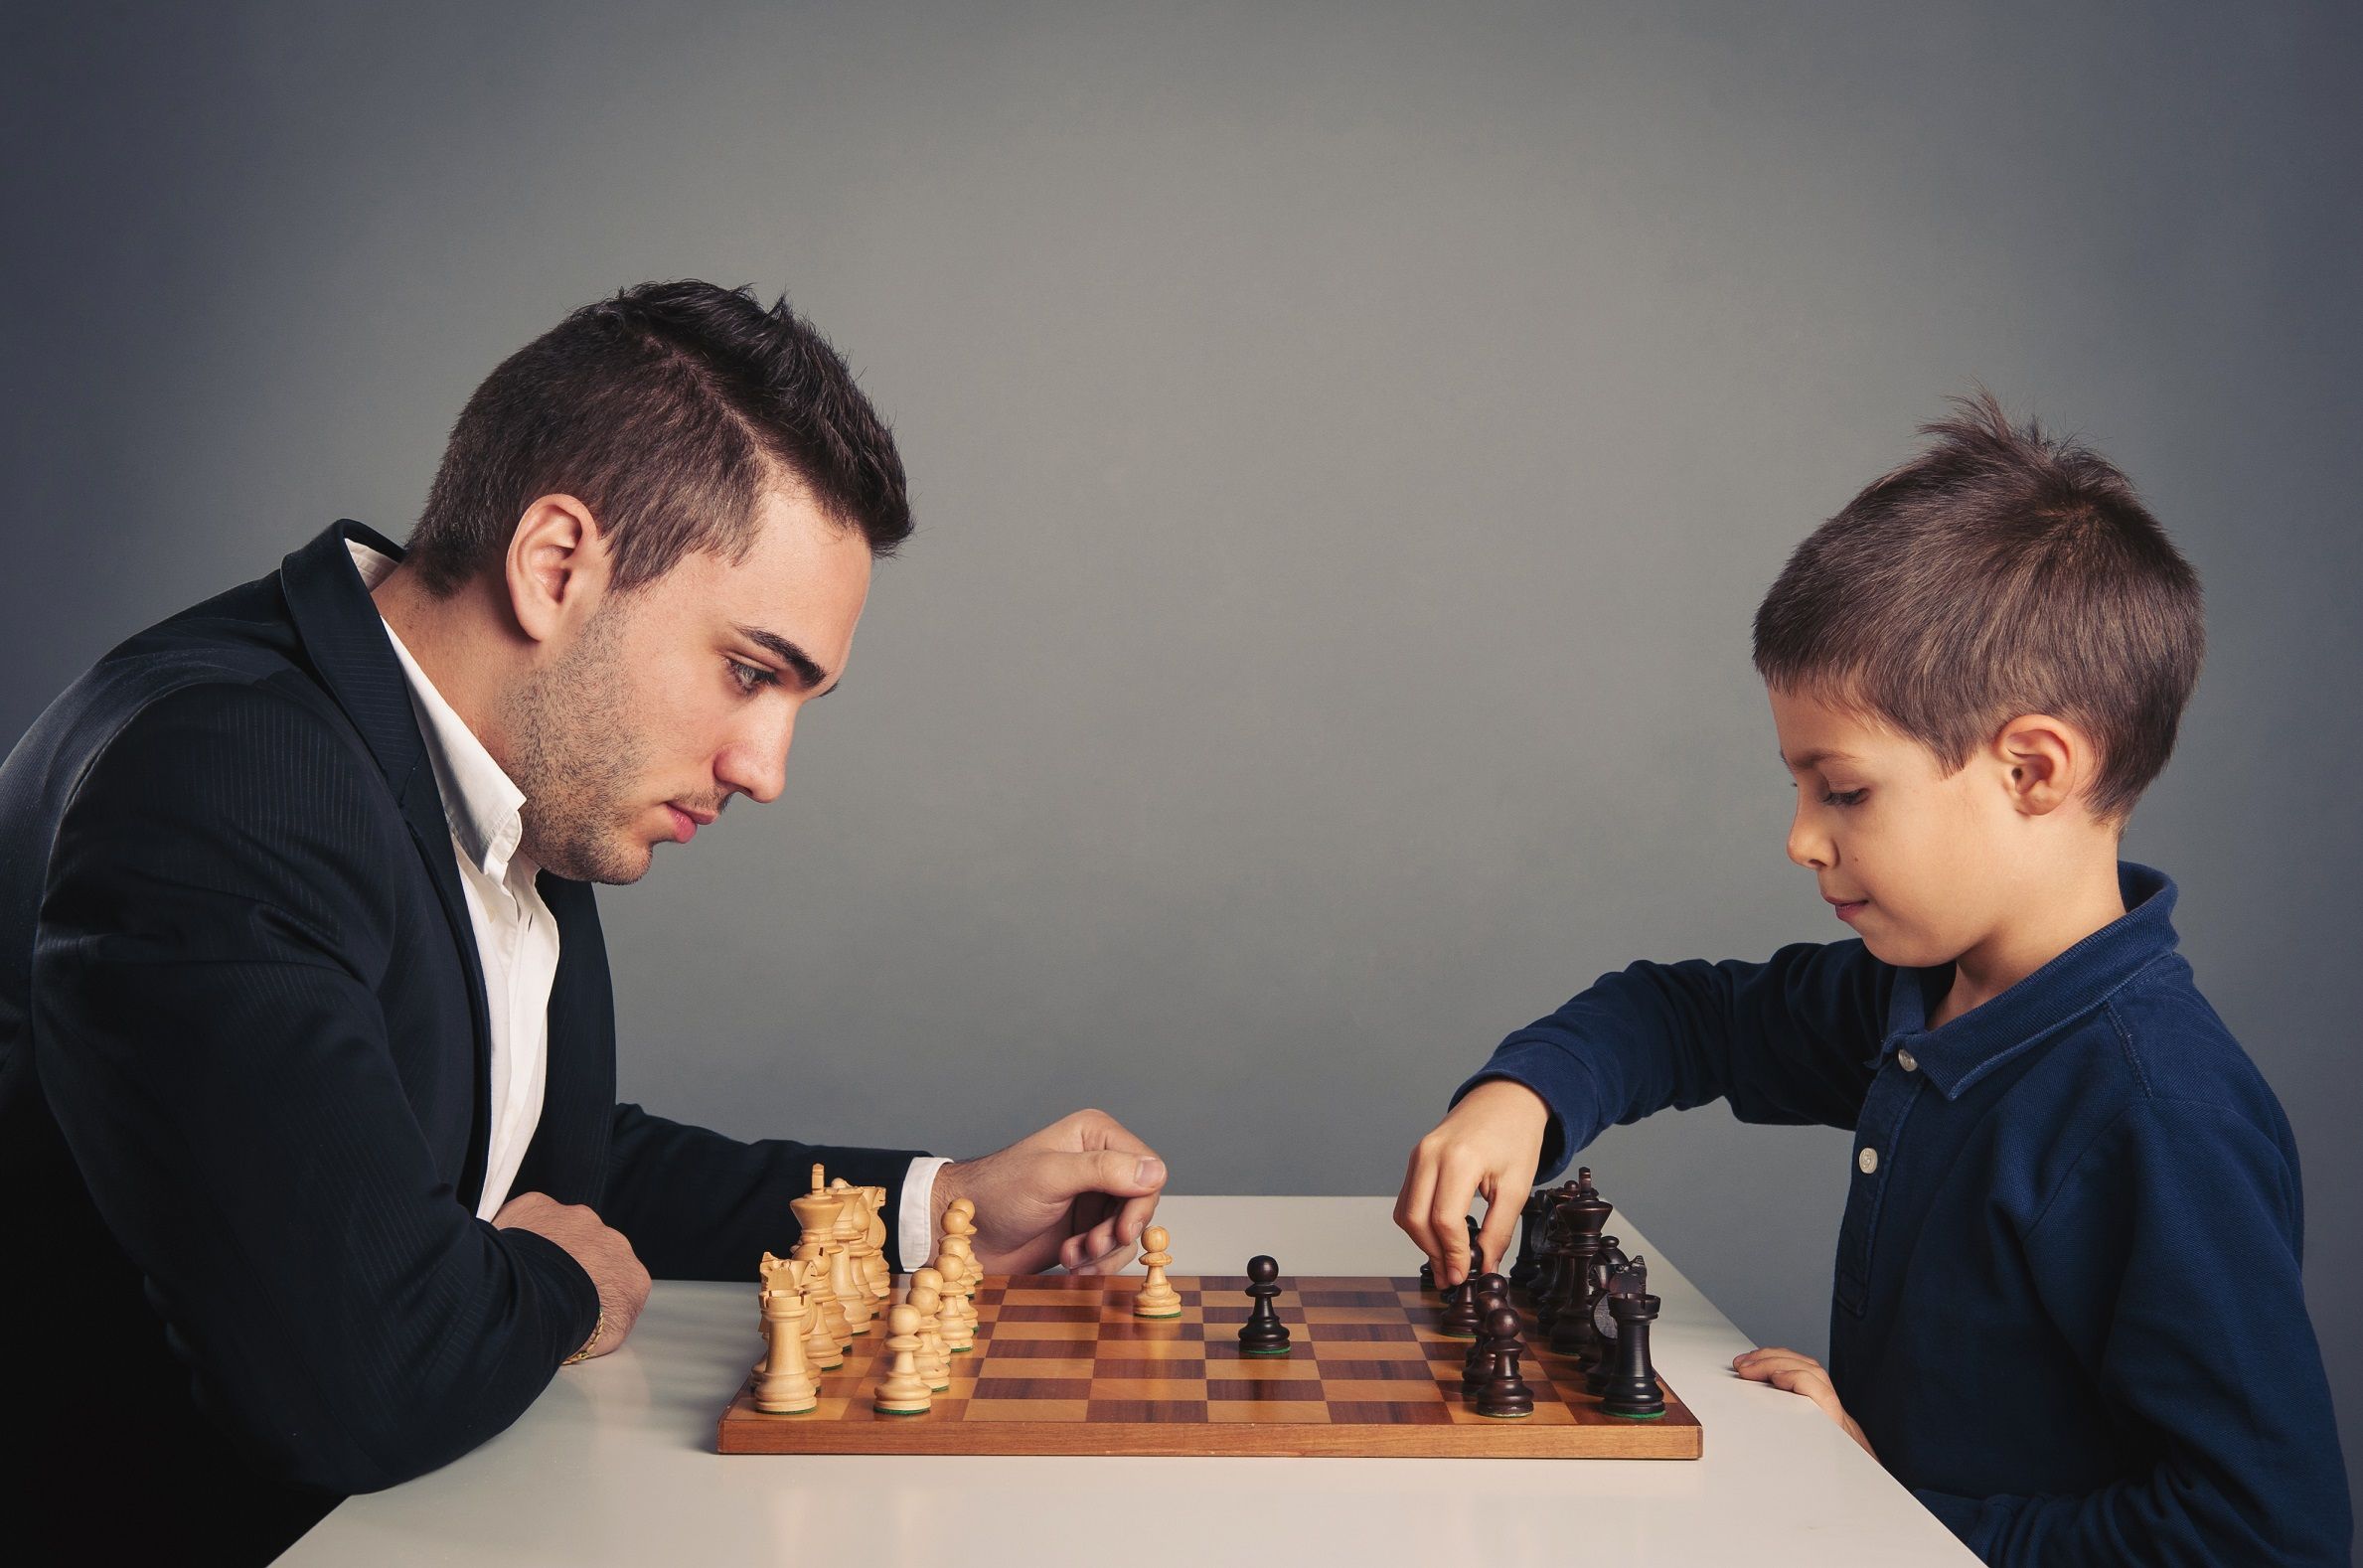 A man in a suit playing chess with a smartly-dressed child.